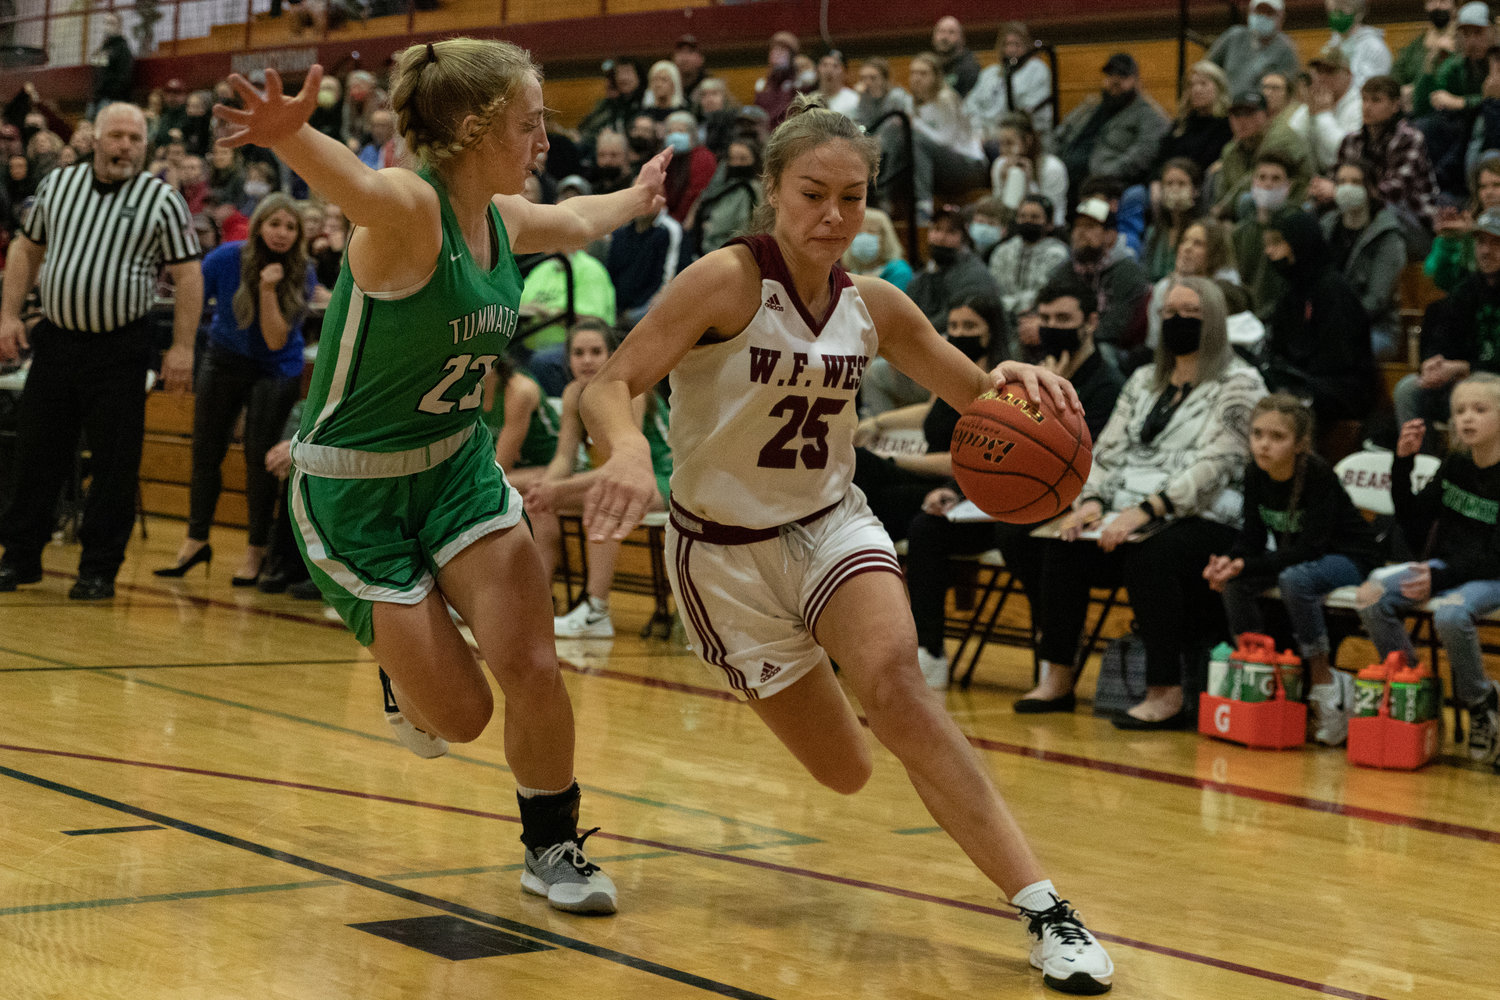 W.F. West point guard Kyla McCallum drives the baseline against Tumwater Dec. 17.